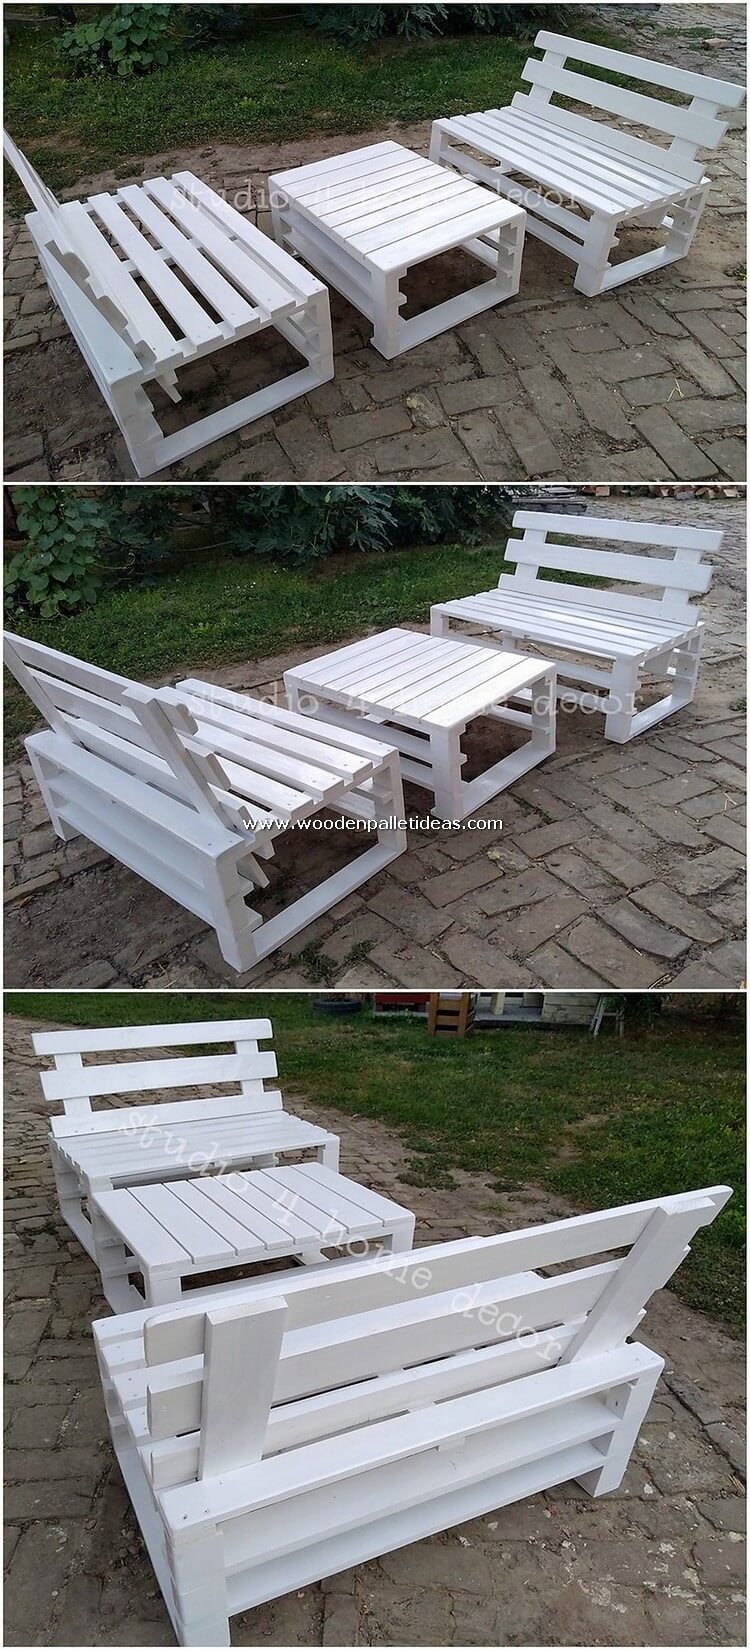 Pallet-Benches-and-Table